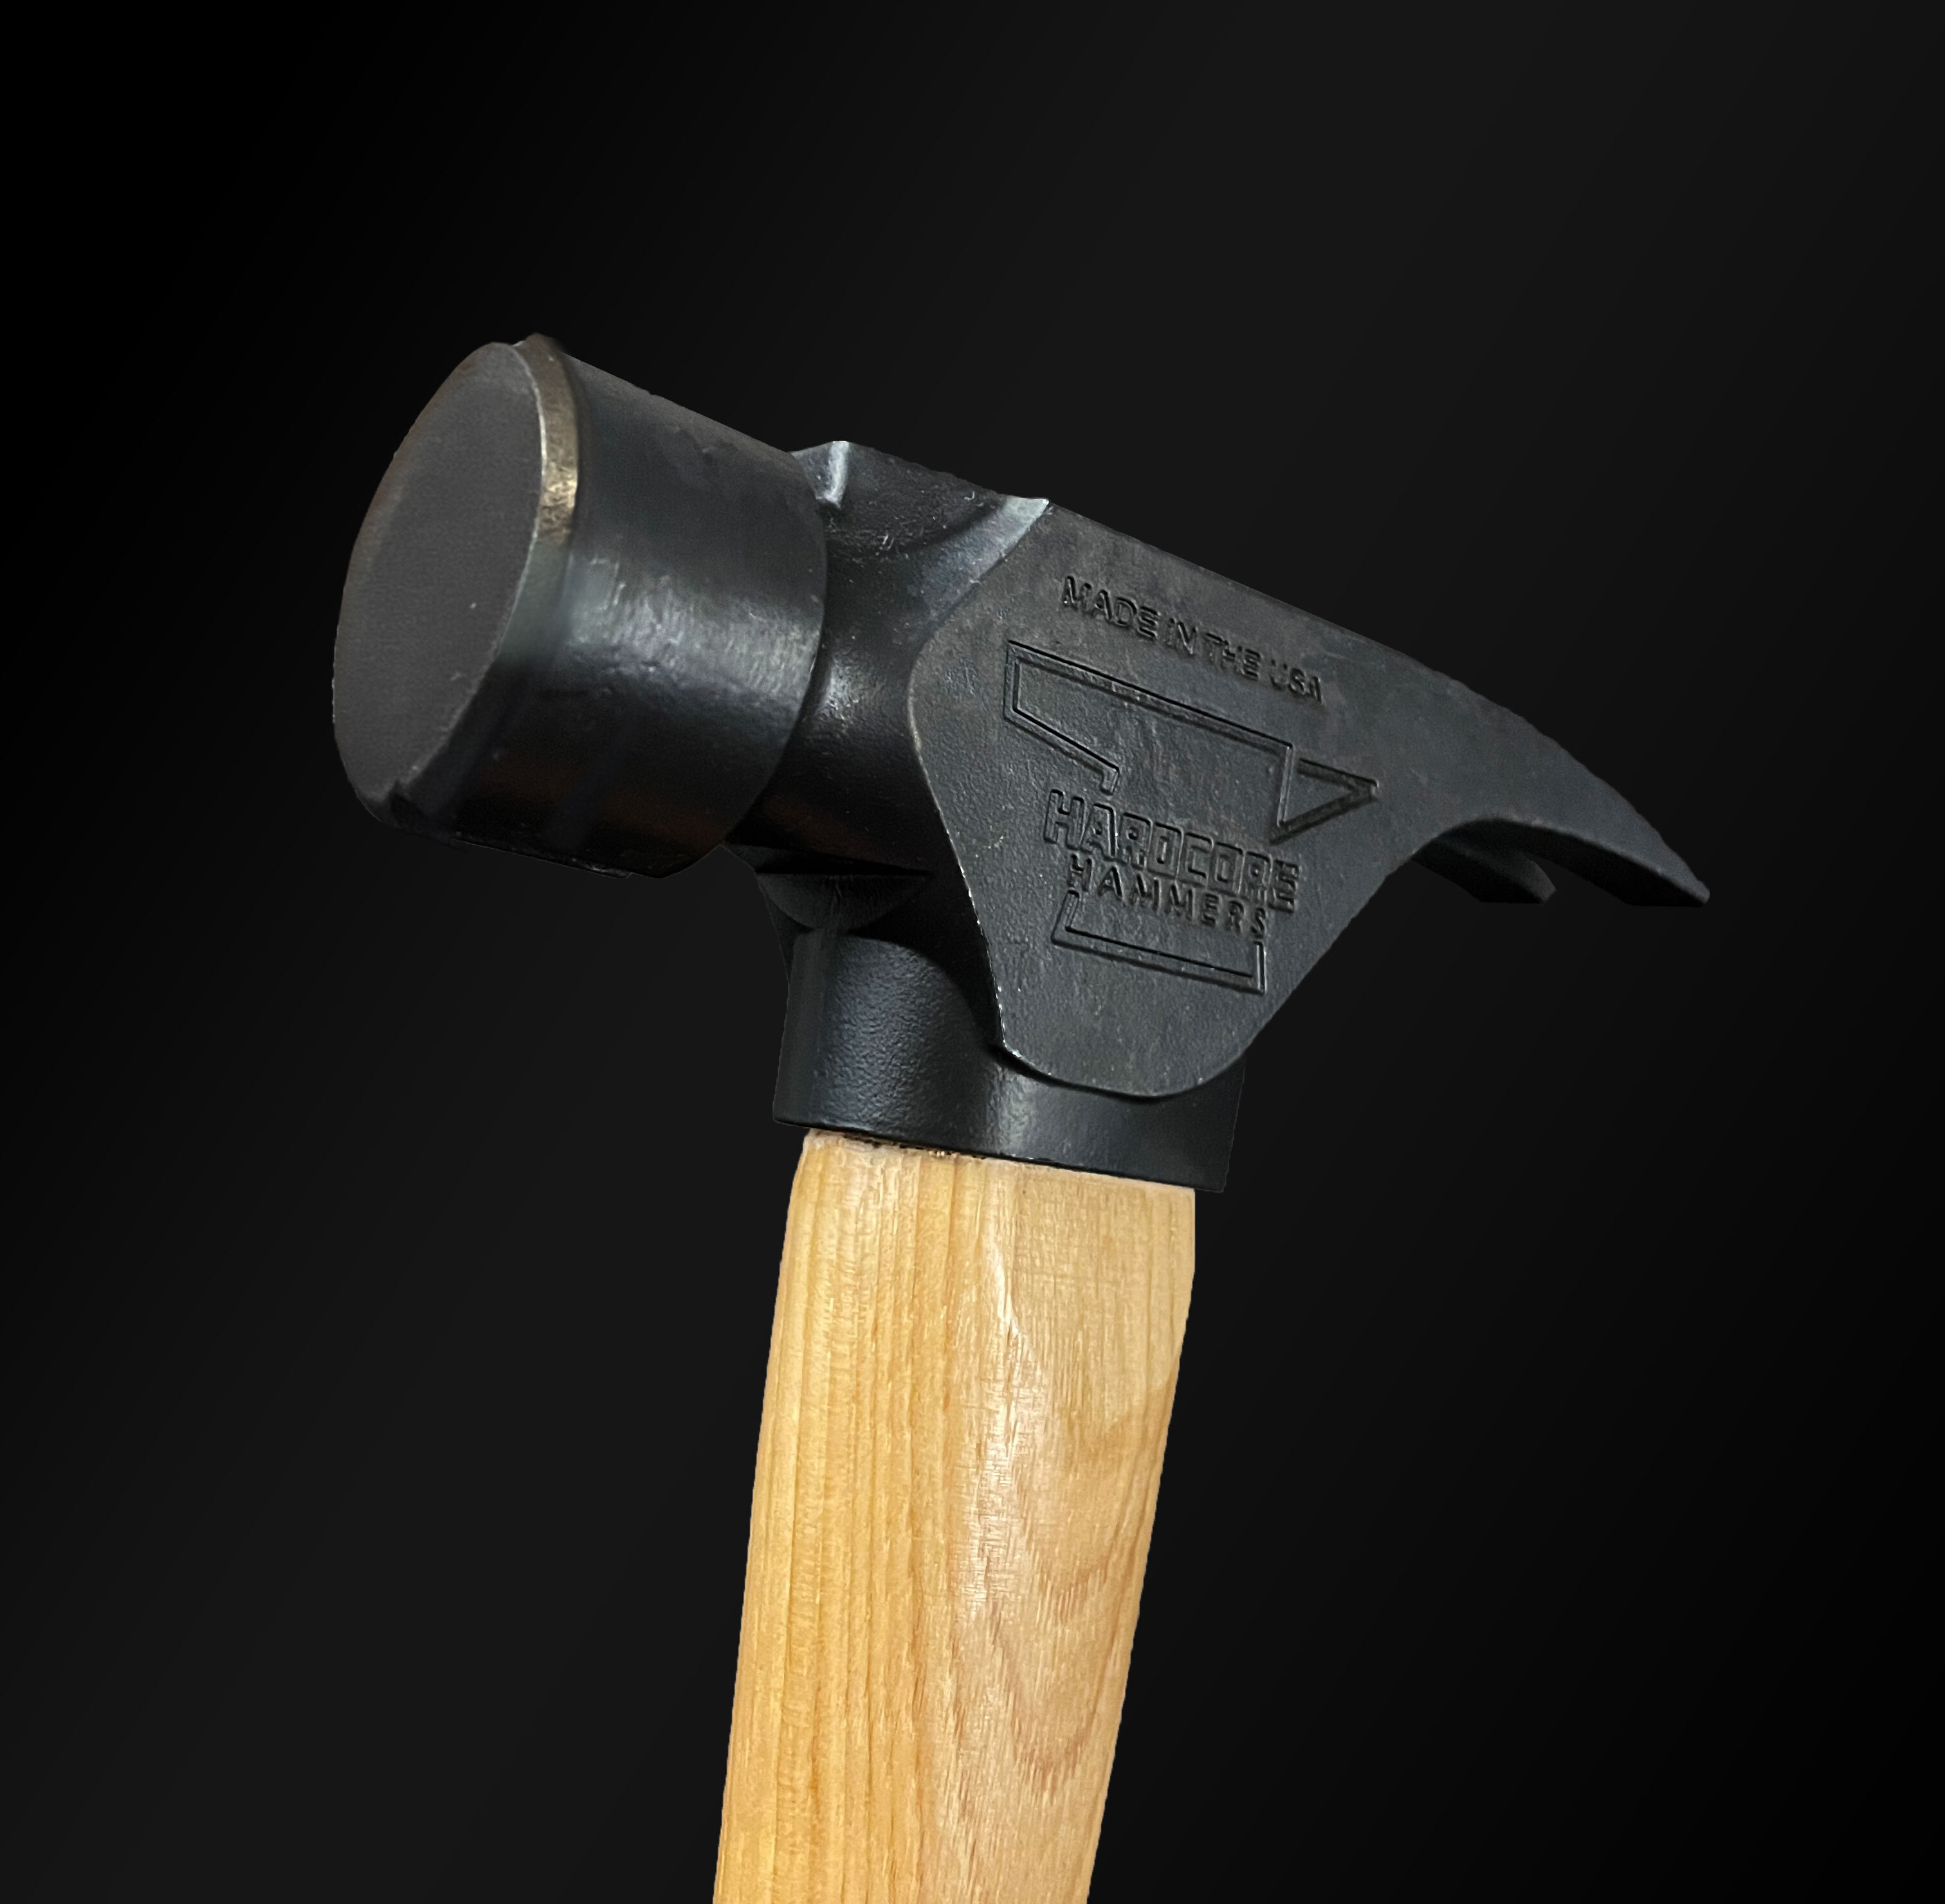 Hardcore Hammers, Axes, and Tool Works